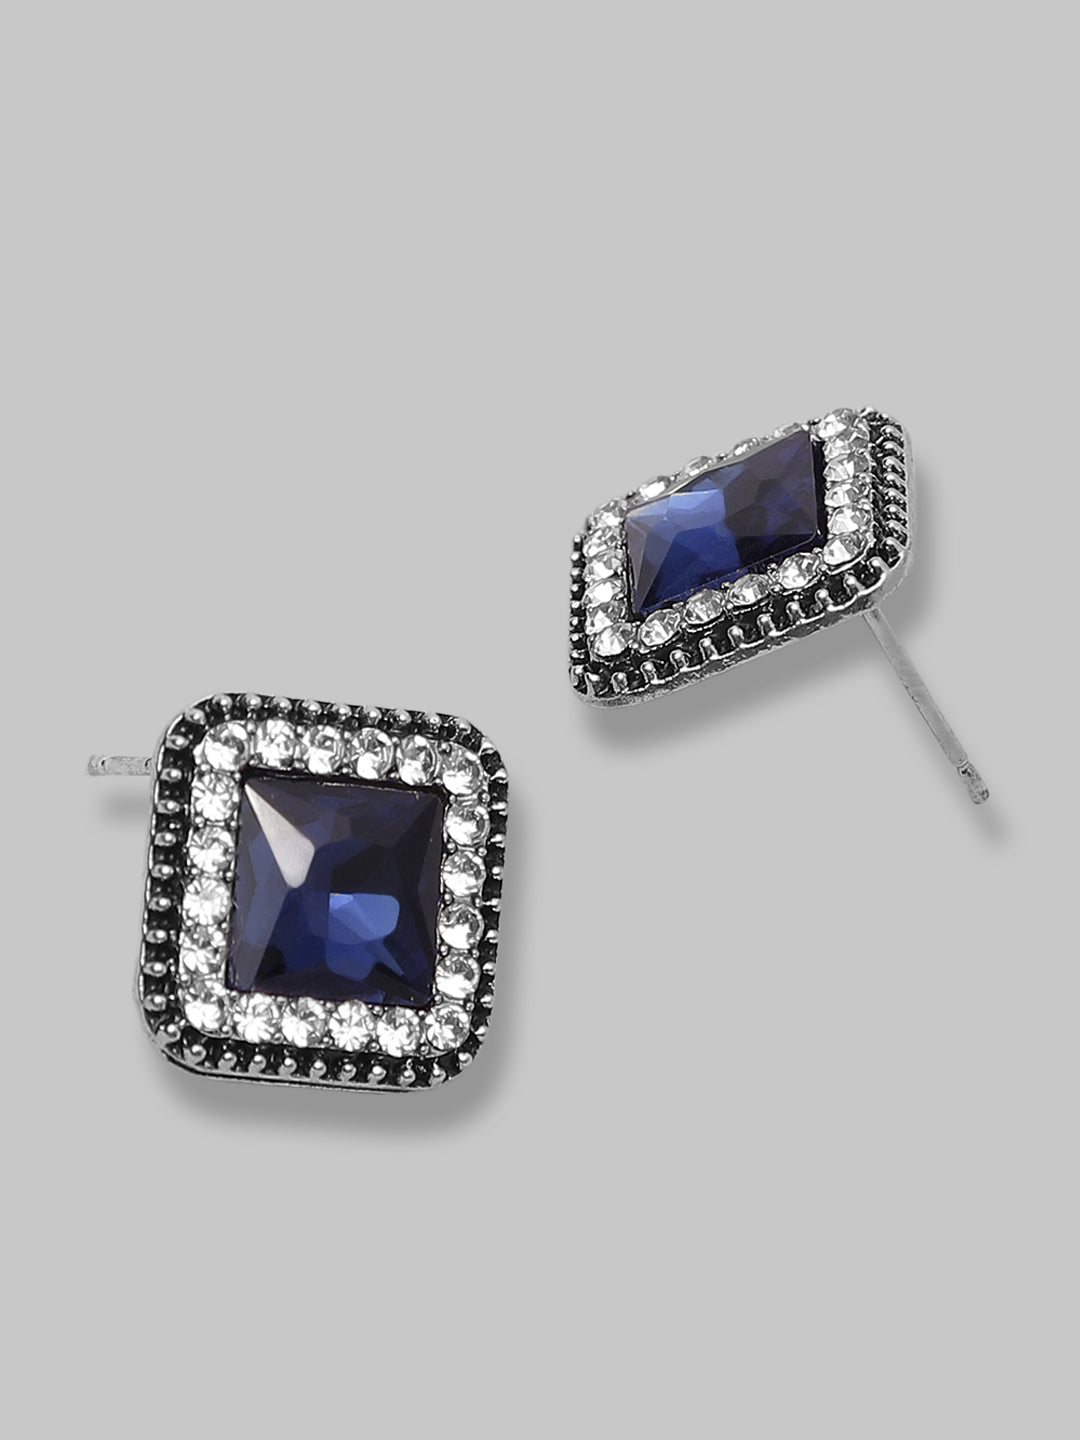 Beautiful Silver Base Metal And Blue Crystal Earrings For Women And Girls